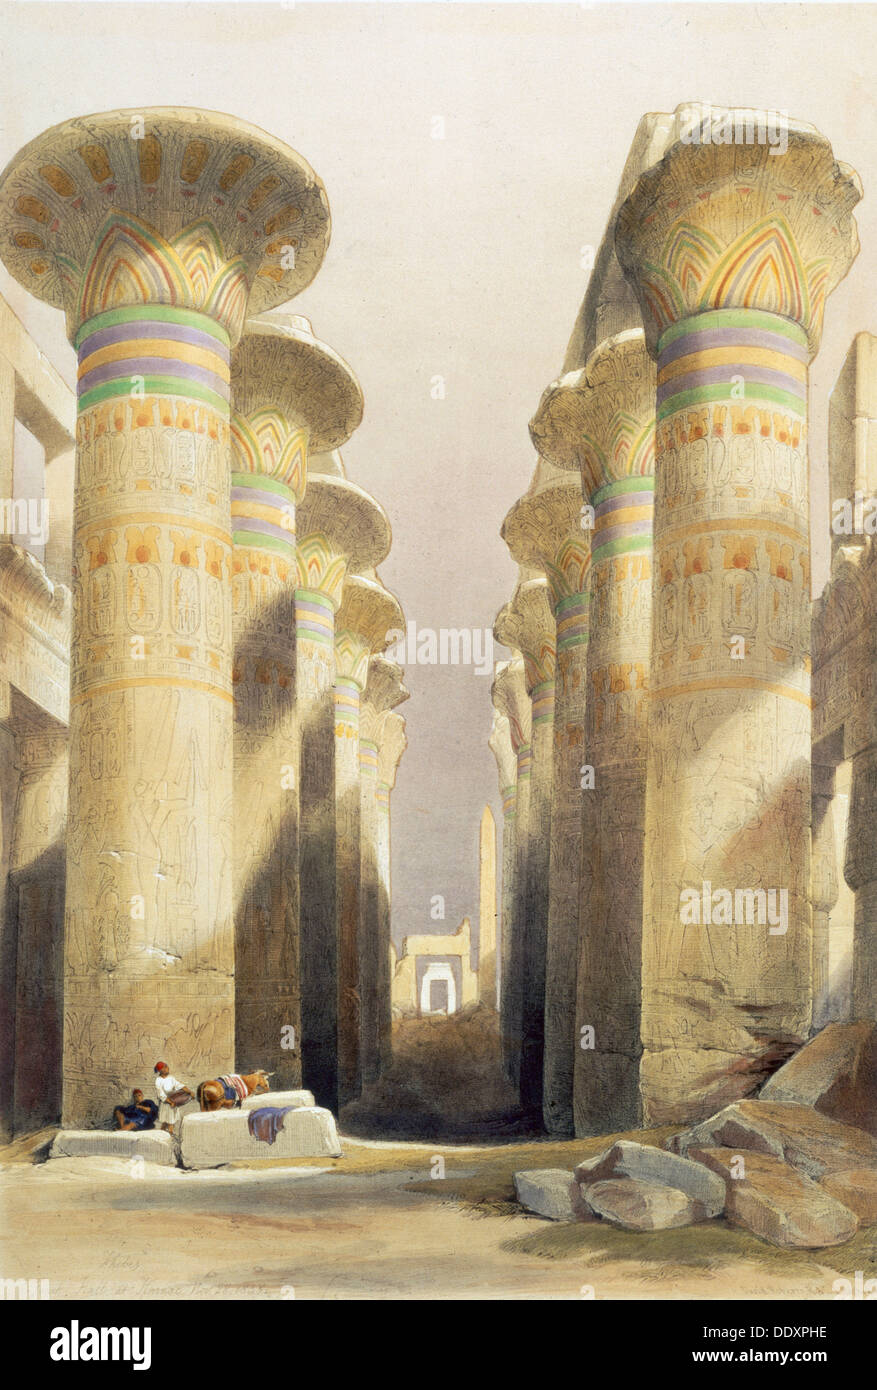 Central avenue of the Great Hall of Columns, Karnak, Egypt, 19th century. Artist: David Roberts Stock Photo